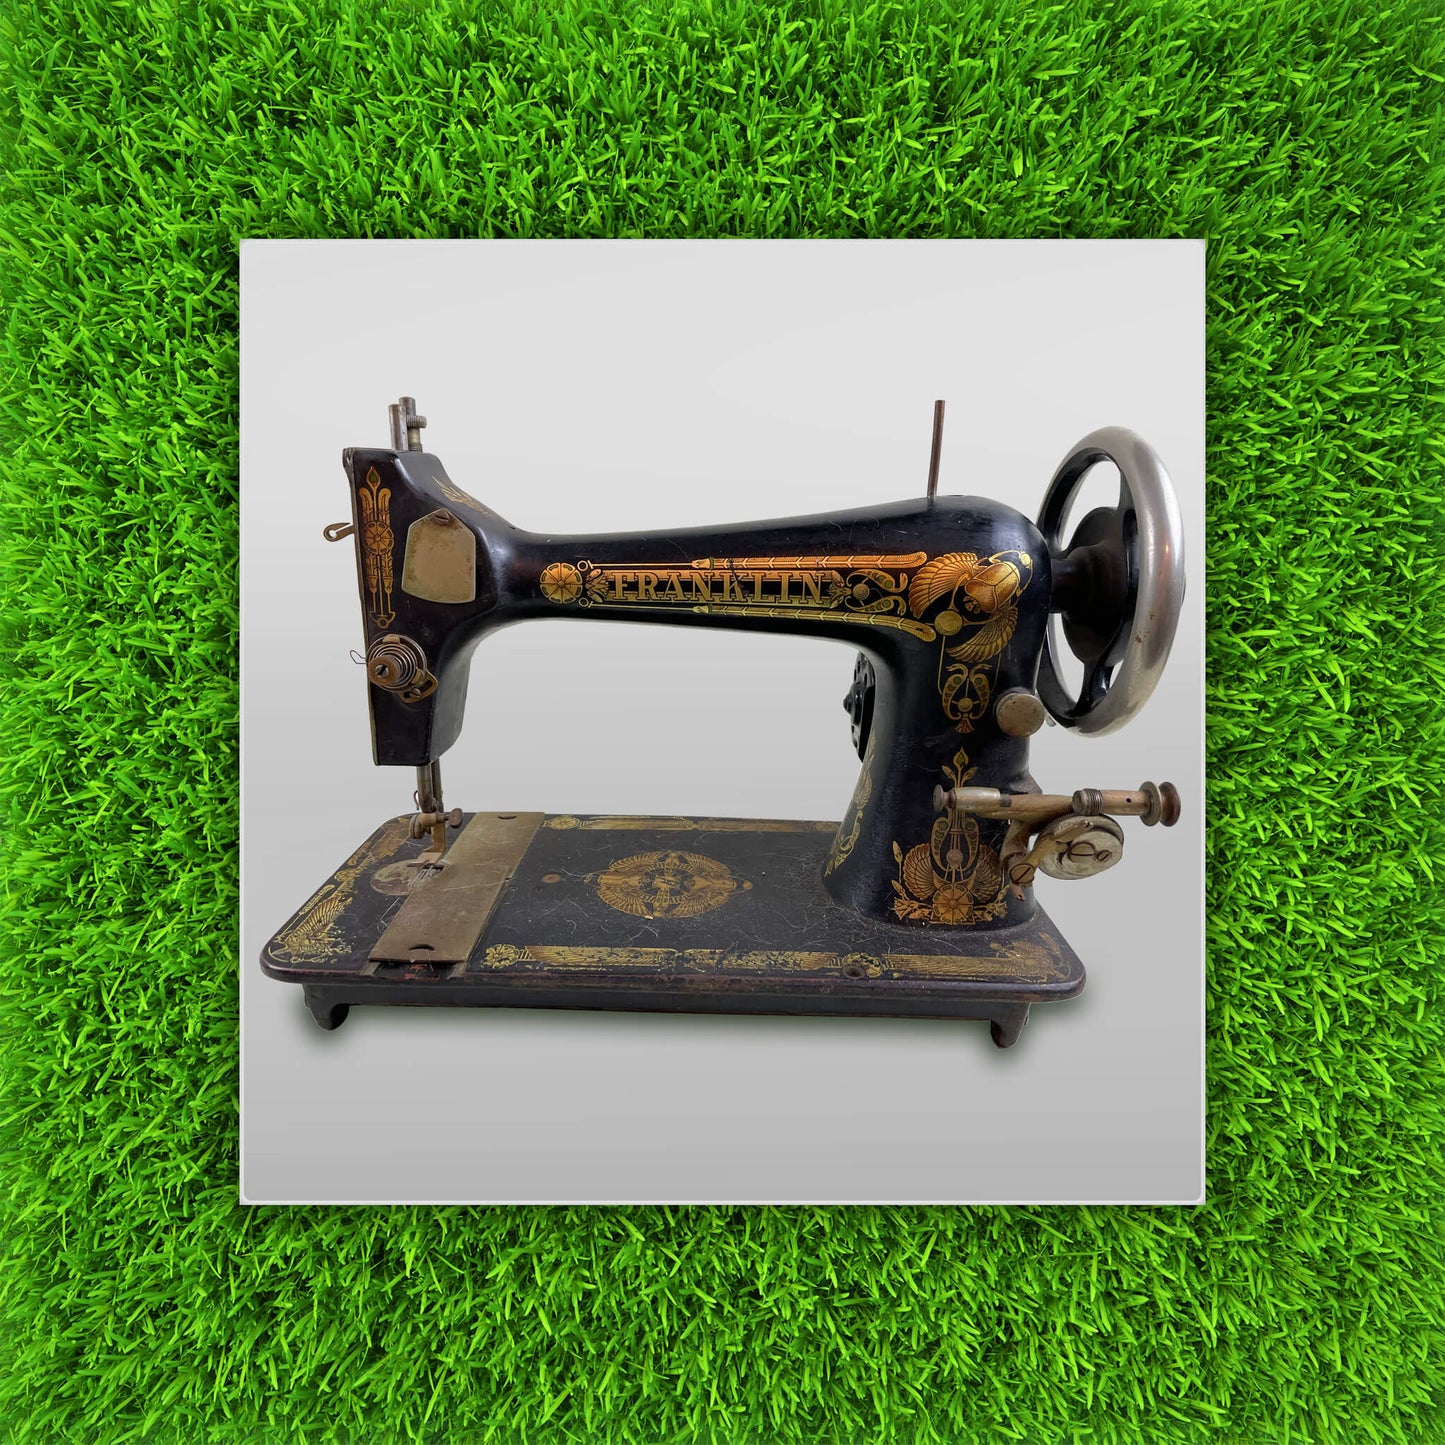 Franklin Sewing Machine - PICK UP ONLY